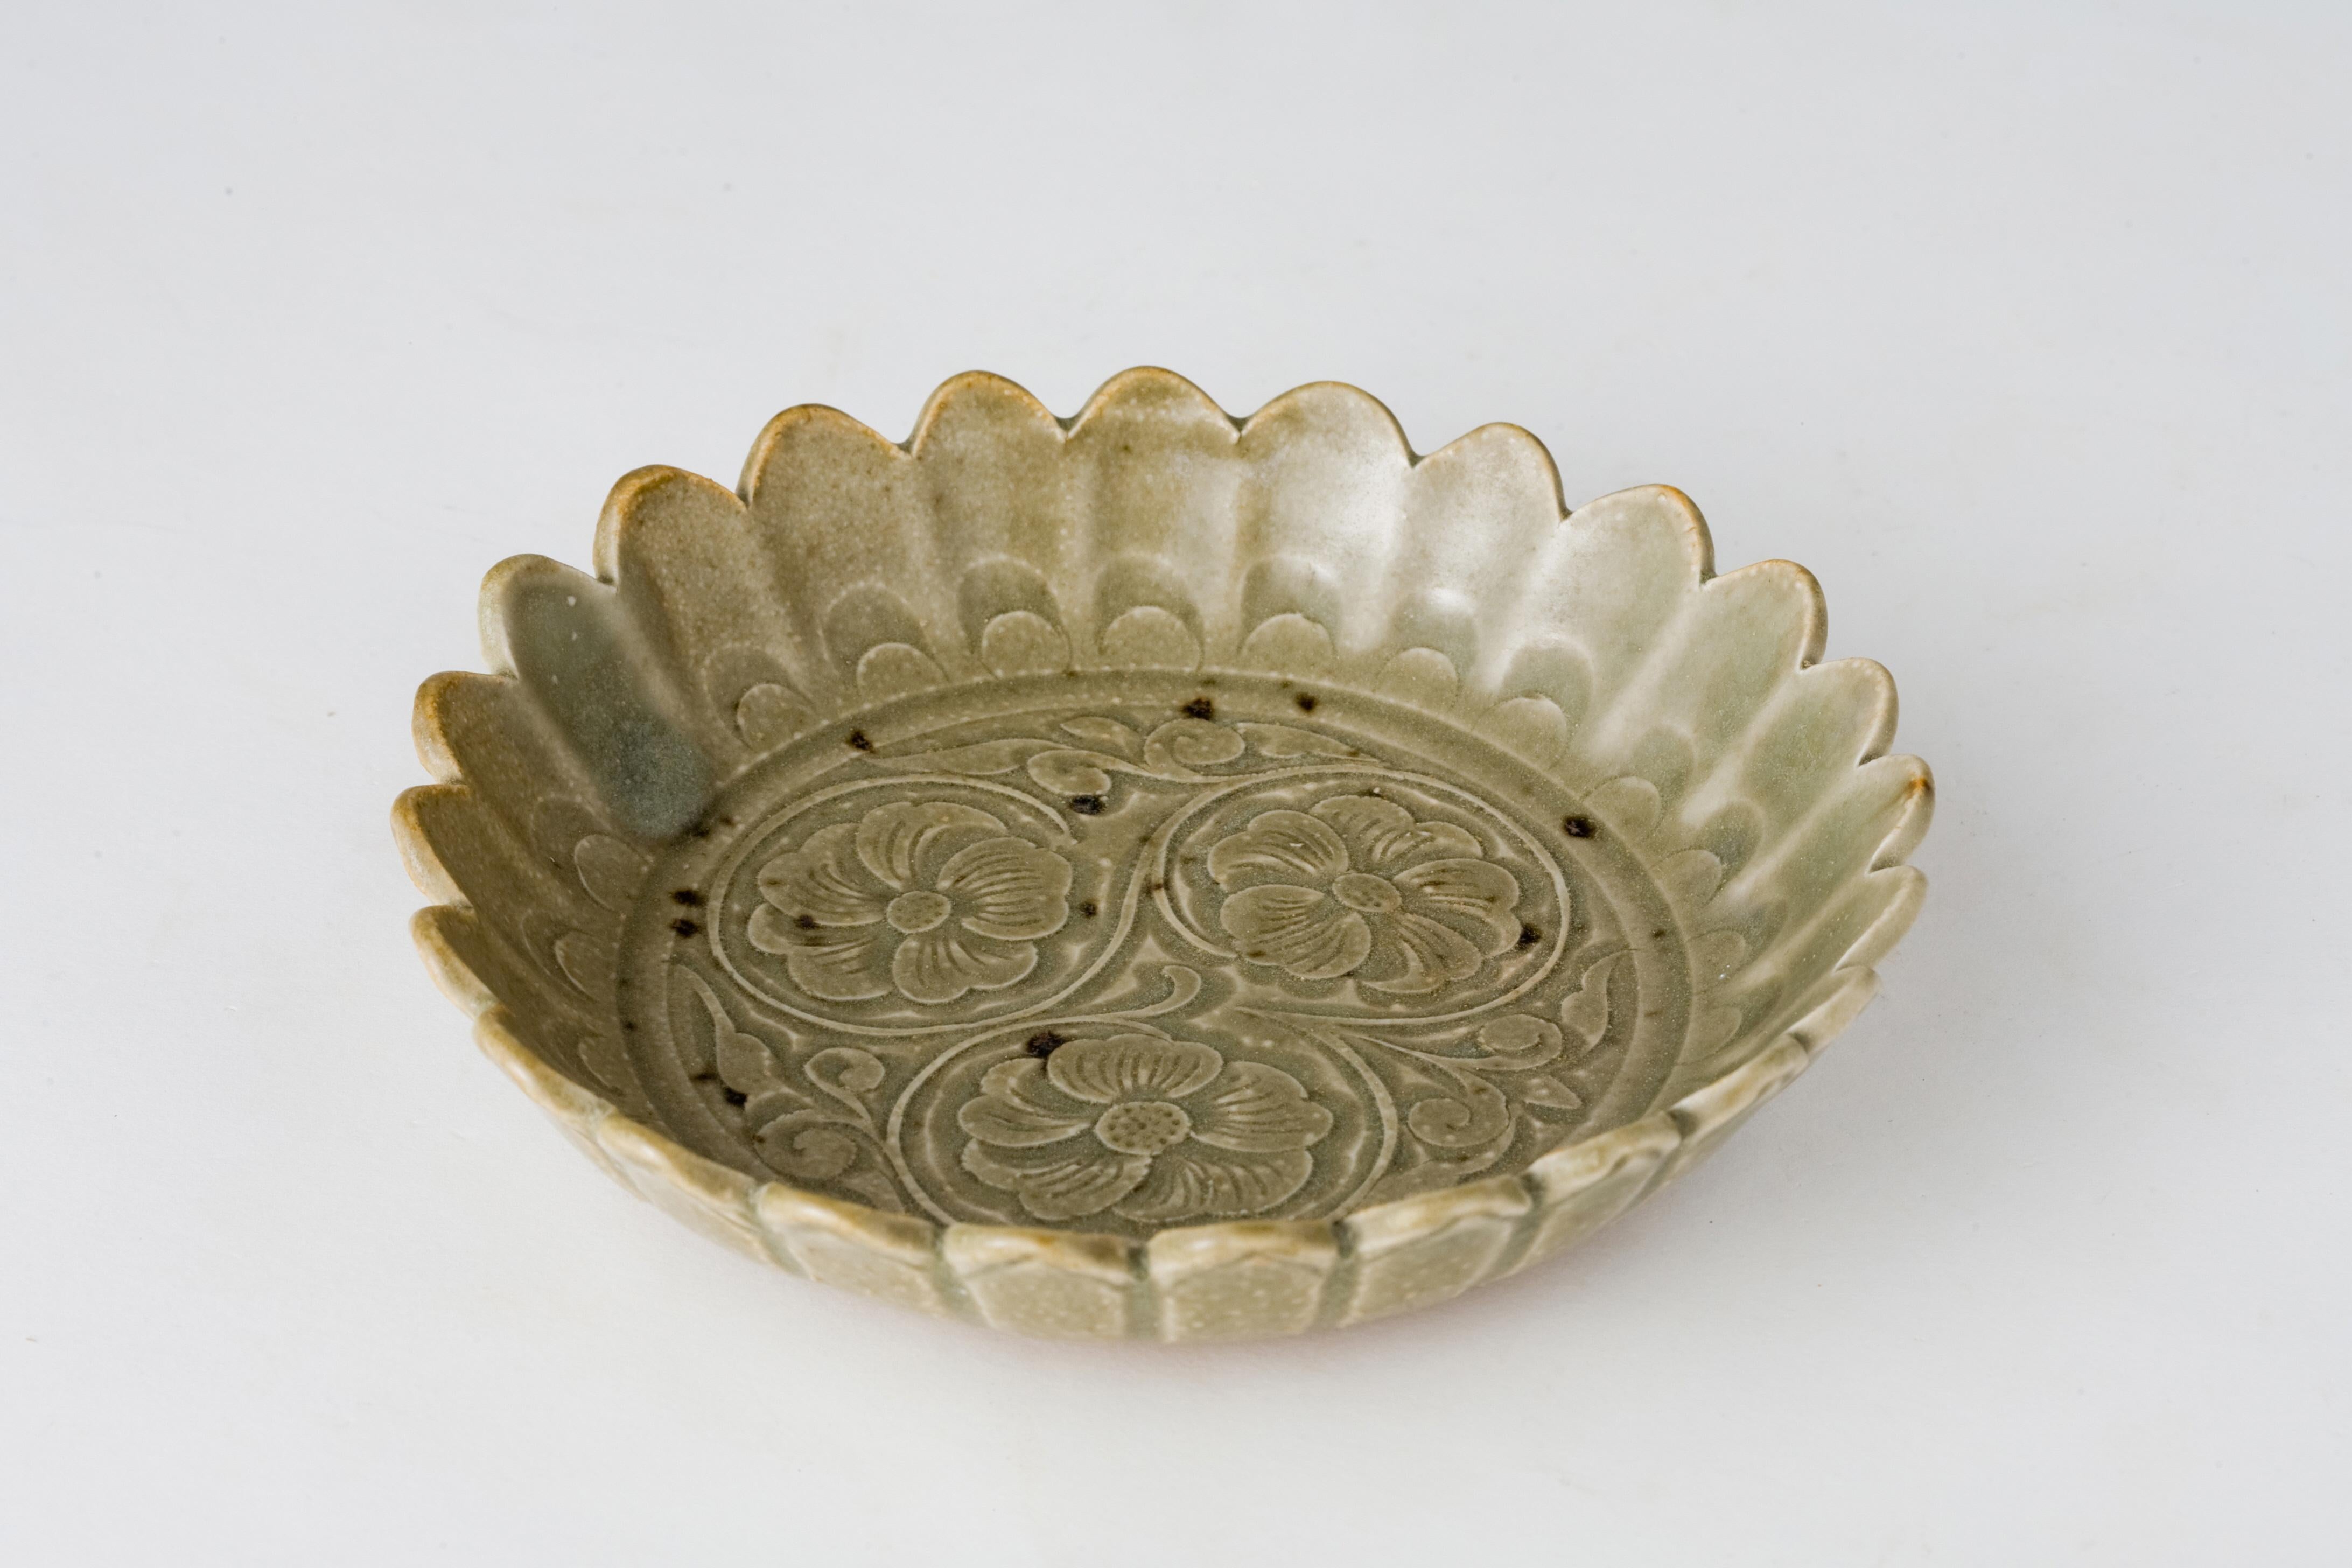 Potted with the fluted sides rising from a recessed base, carved to the interior with Chrysanthemum, covered overall with a grayish-green glaze, save for a ring to the underside left unglazed to reveal the gray stoneware body

Period : Jin